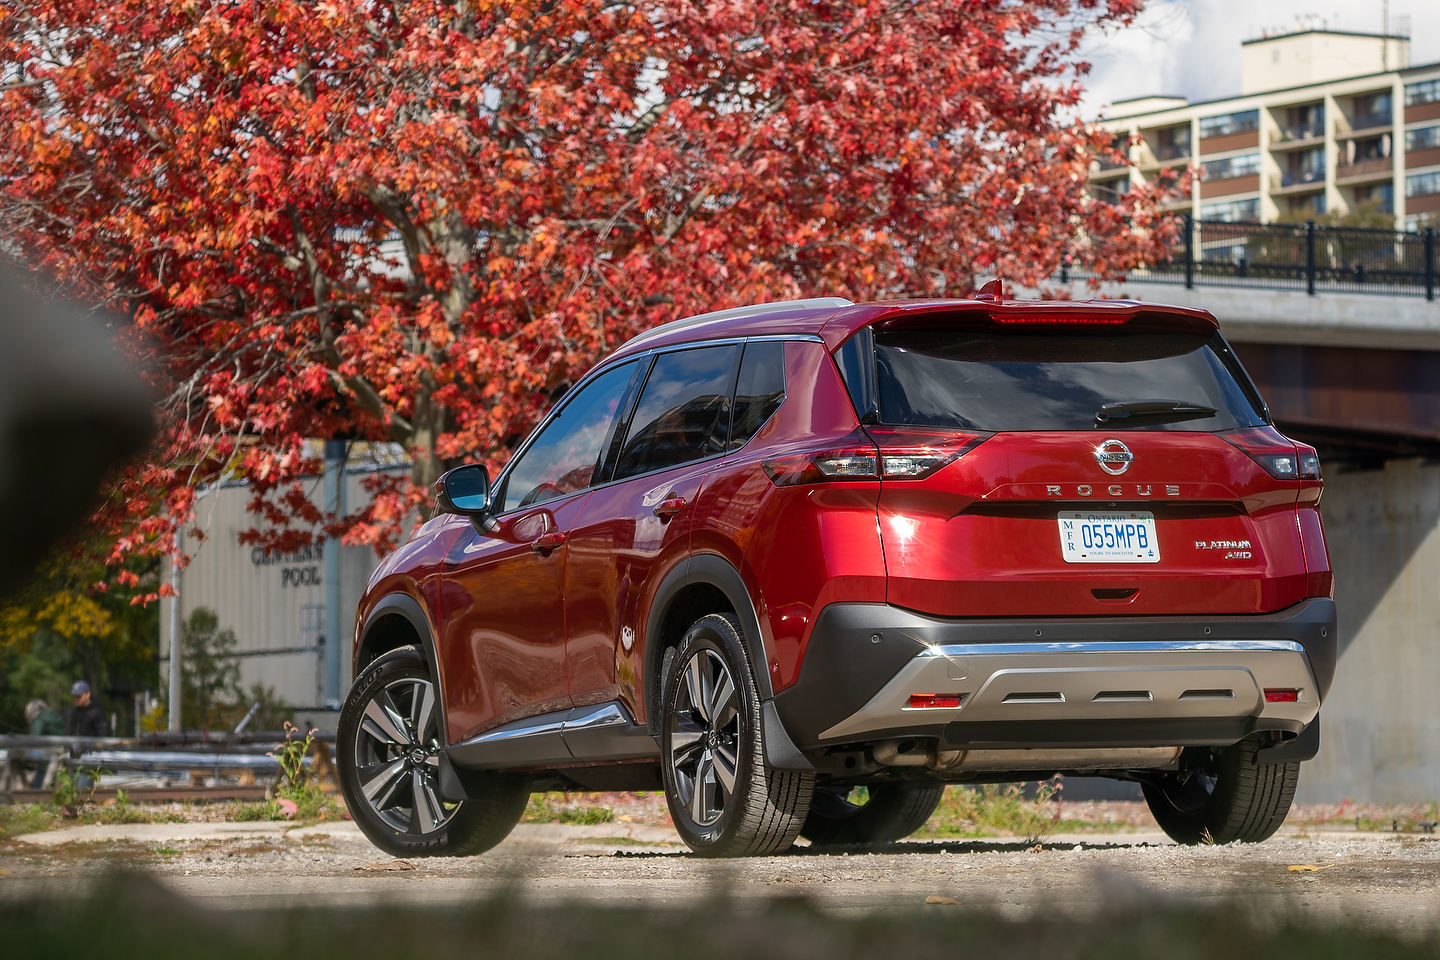 What the experts say about the 2021 Nissan Rogue